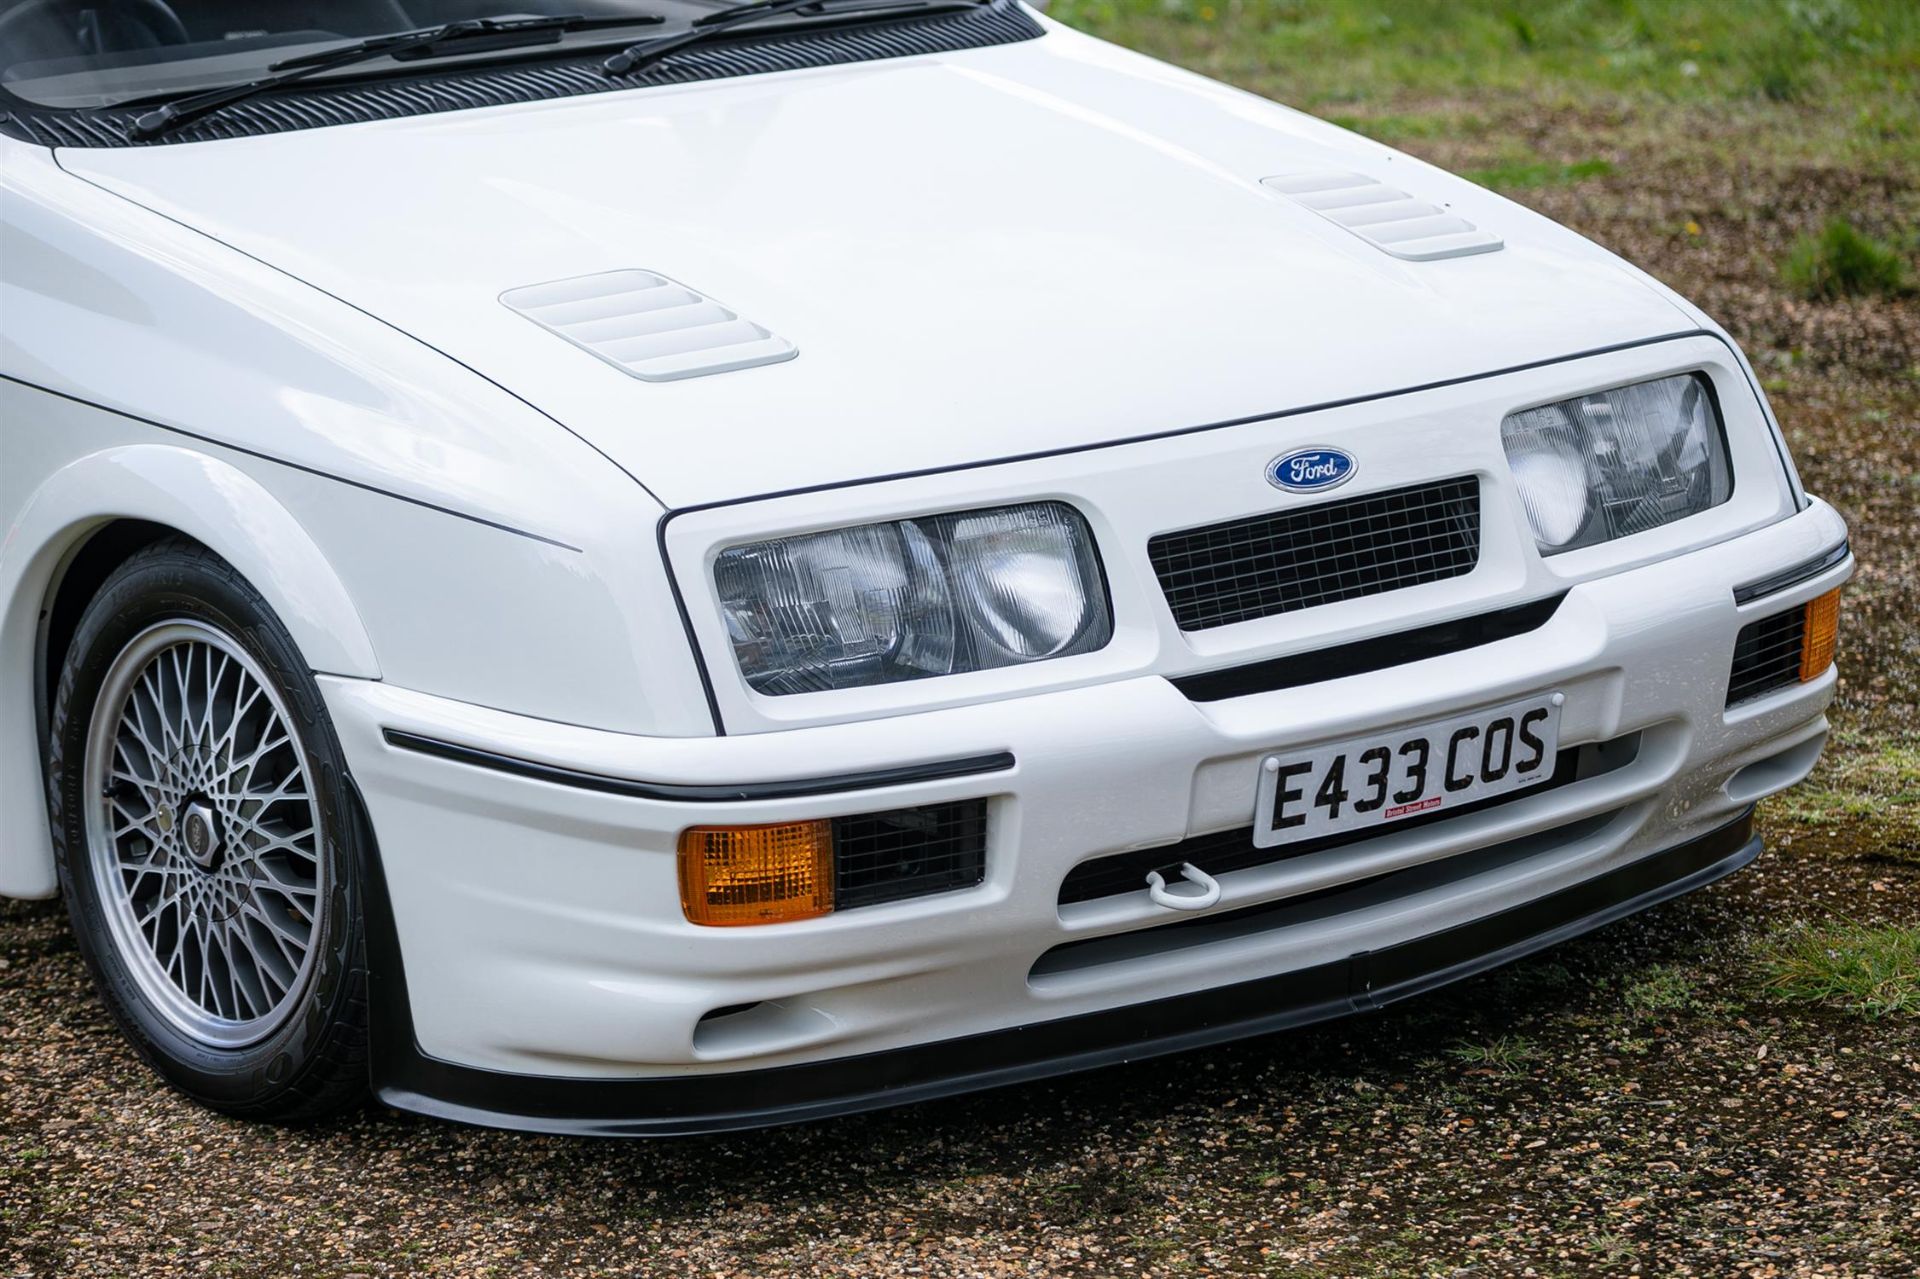 1987 Ford Sierra RS500 Cosworth #433 - 12,805 Miles - Image 8 of 10